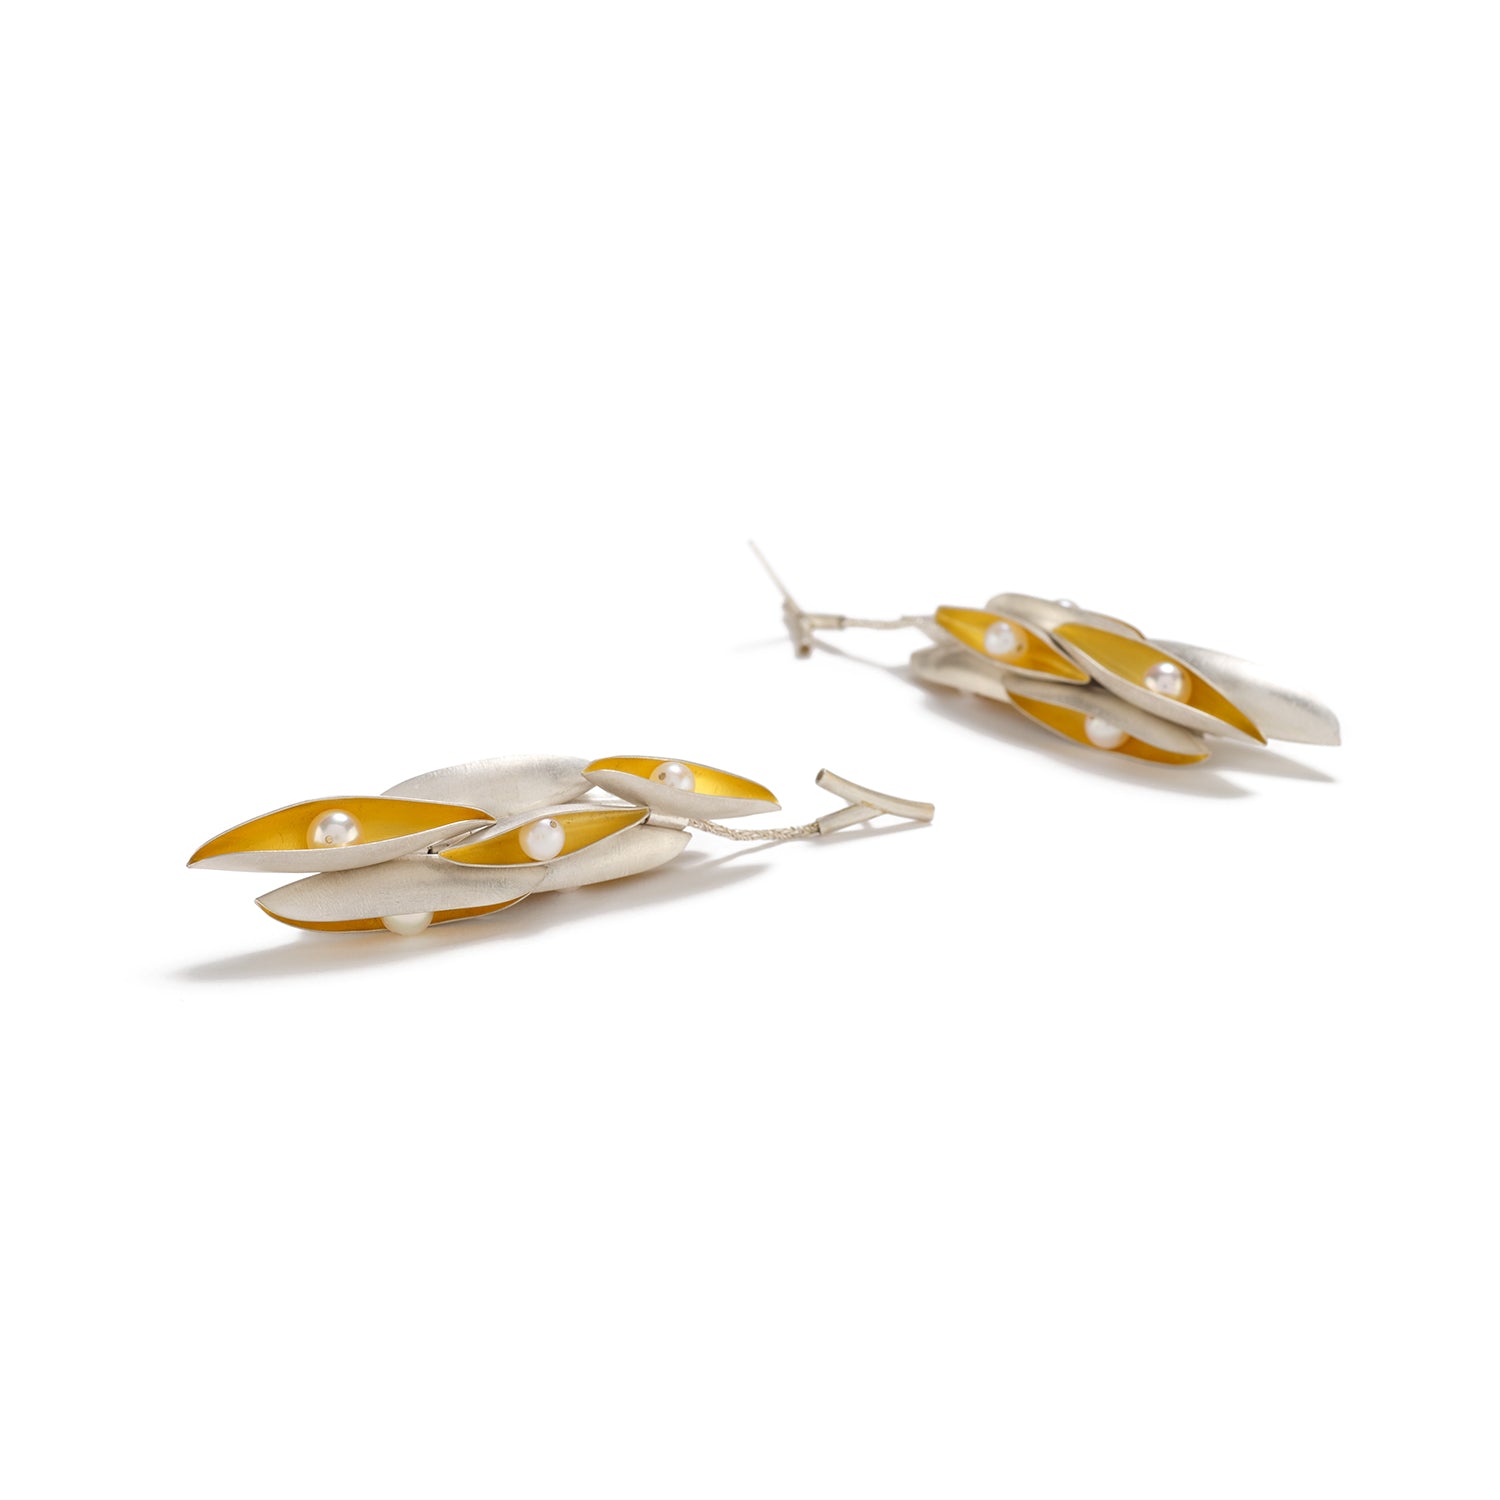 Graduated Pod Earrings with Pearls